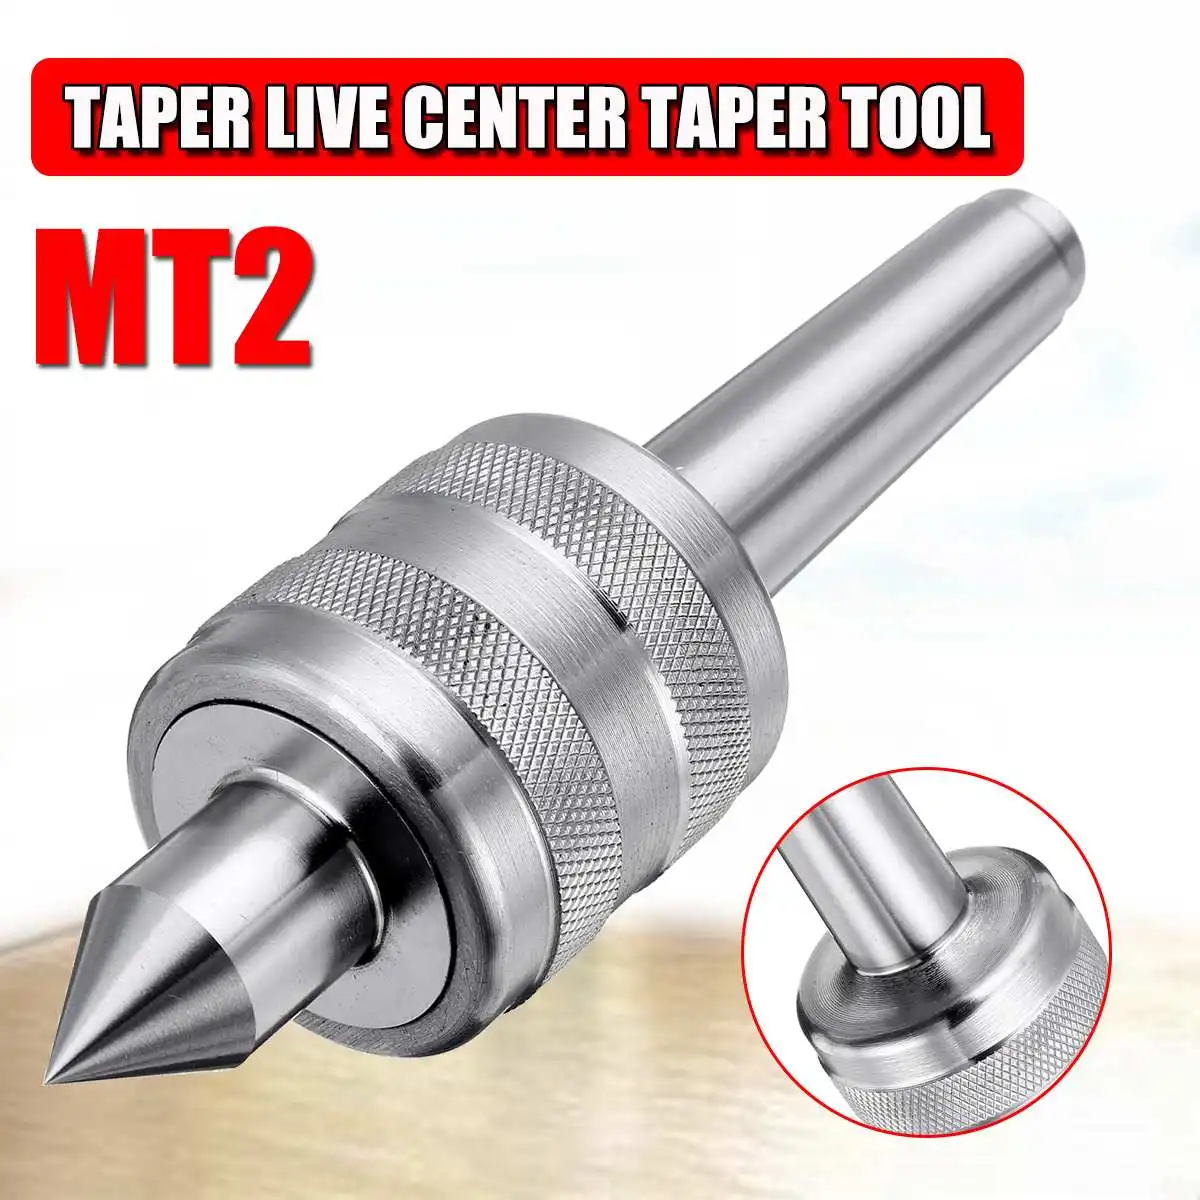 WOLIKE Accuracy Steel Silver MT2 0.001 Lathe Live Center Taper Tool Live Revolving Milling Center Taper Machine Accessories New